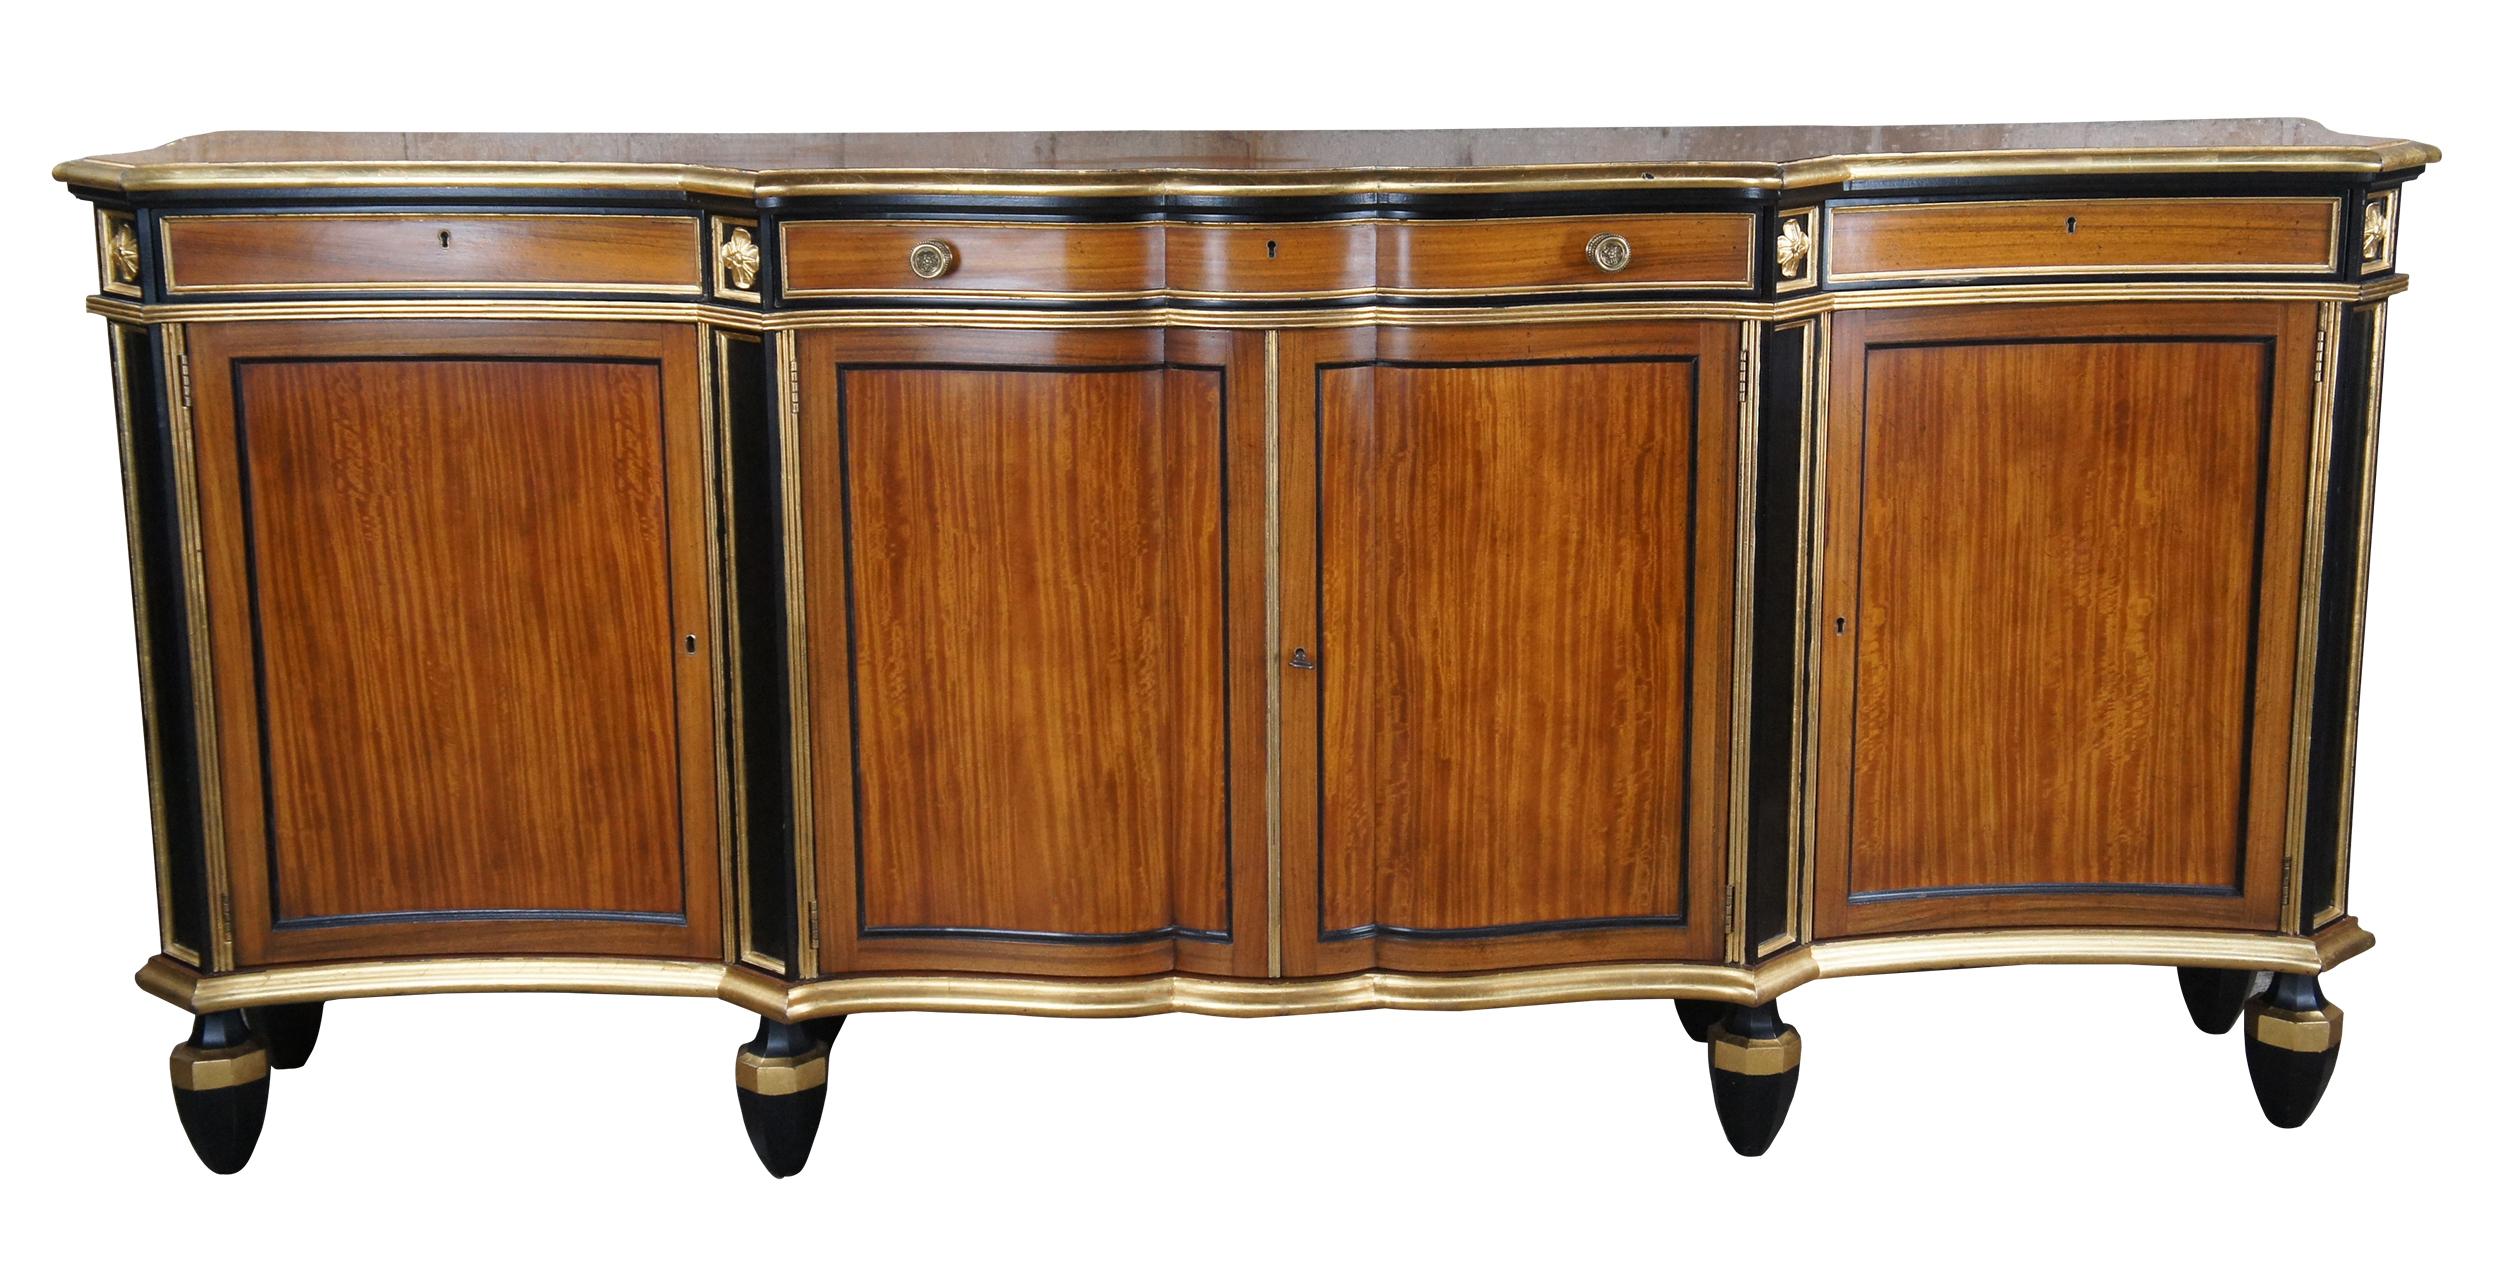 Exquisite dining room buffet, sideboard, server or hall console from The Stately Homes Collection #5230 by Baker Furniture. A serpentine form made from Satinwood with ebonized trim, carved rosettes at canted angles and giltwood borders. The frieze